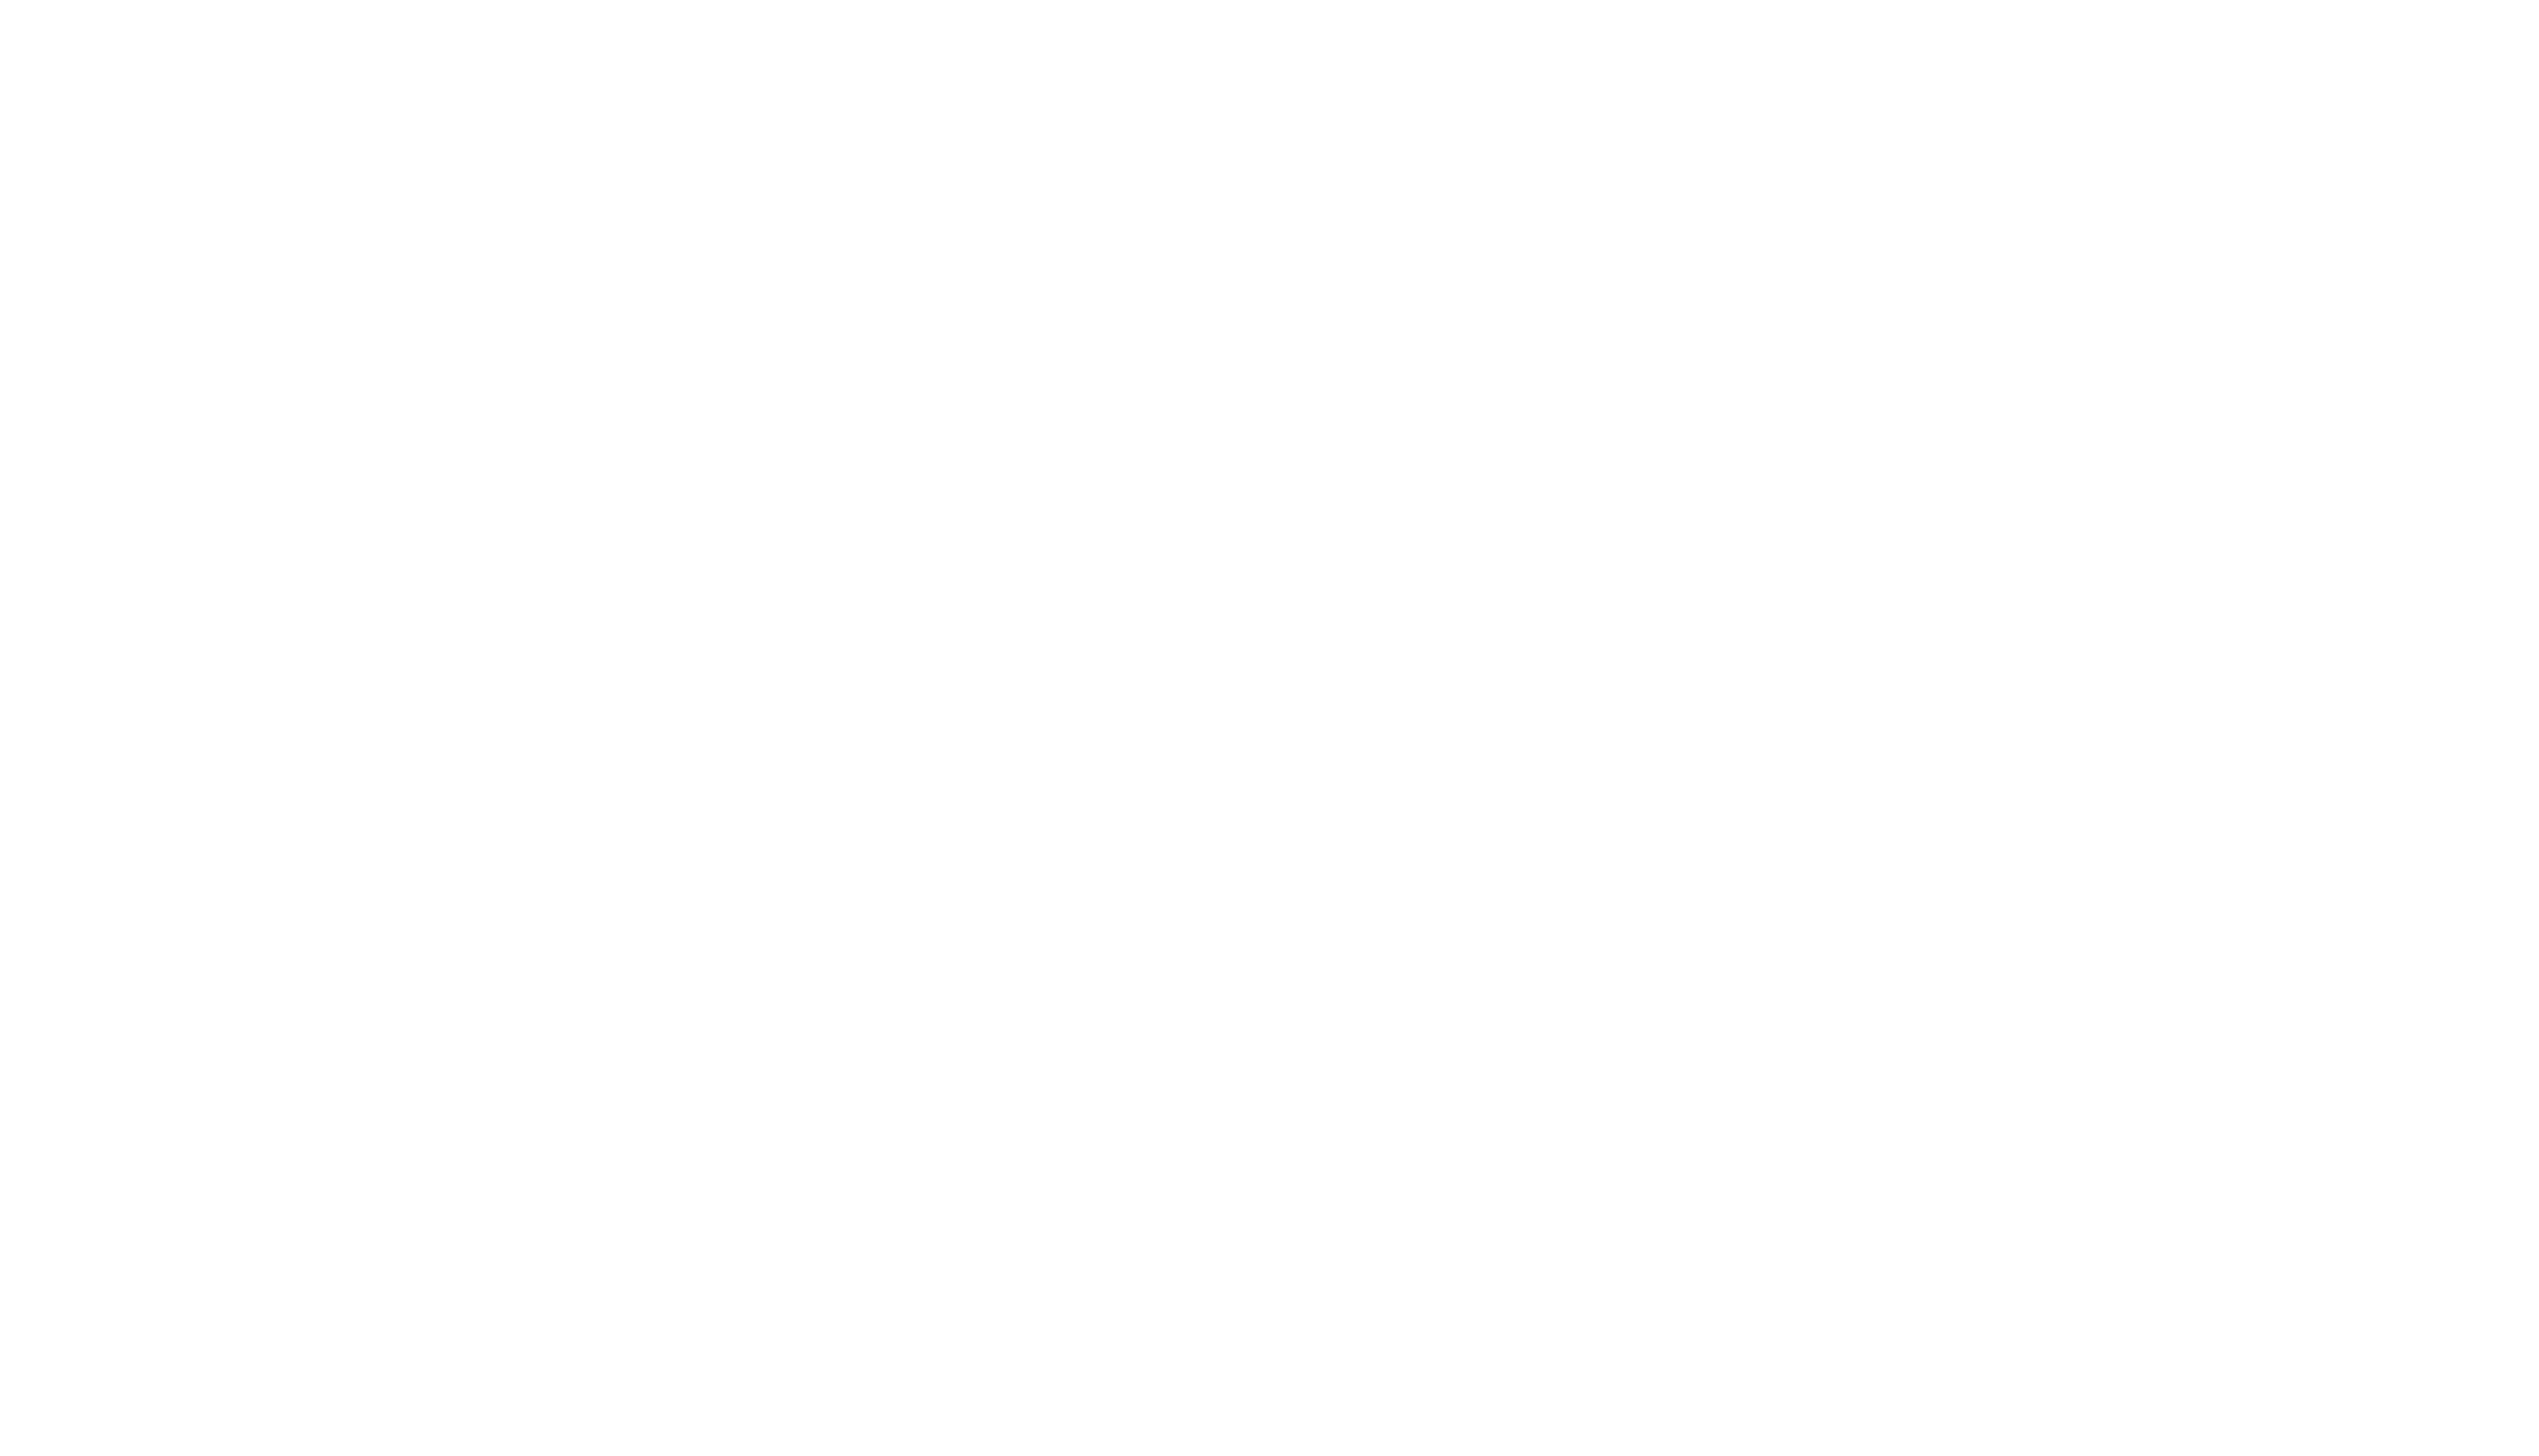 Sydney Indian Wedding Photographer and Videographer | Stuck In A Moment Photo+Cinema